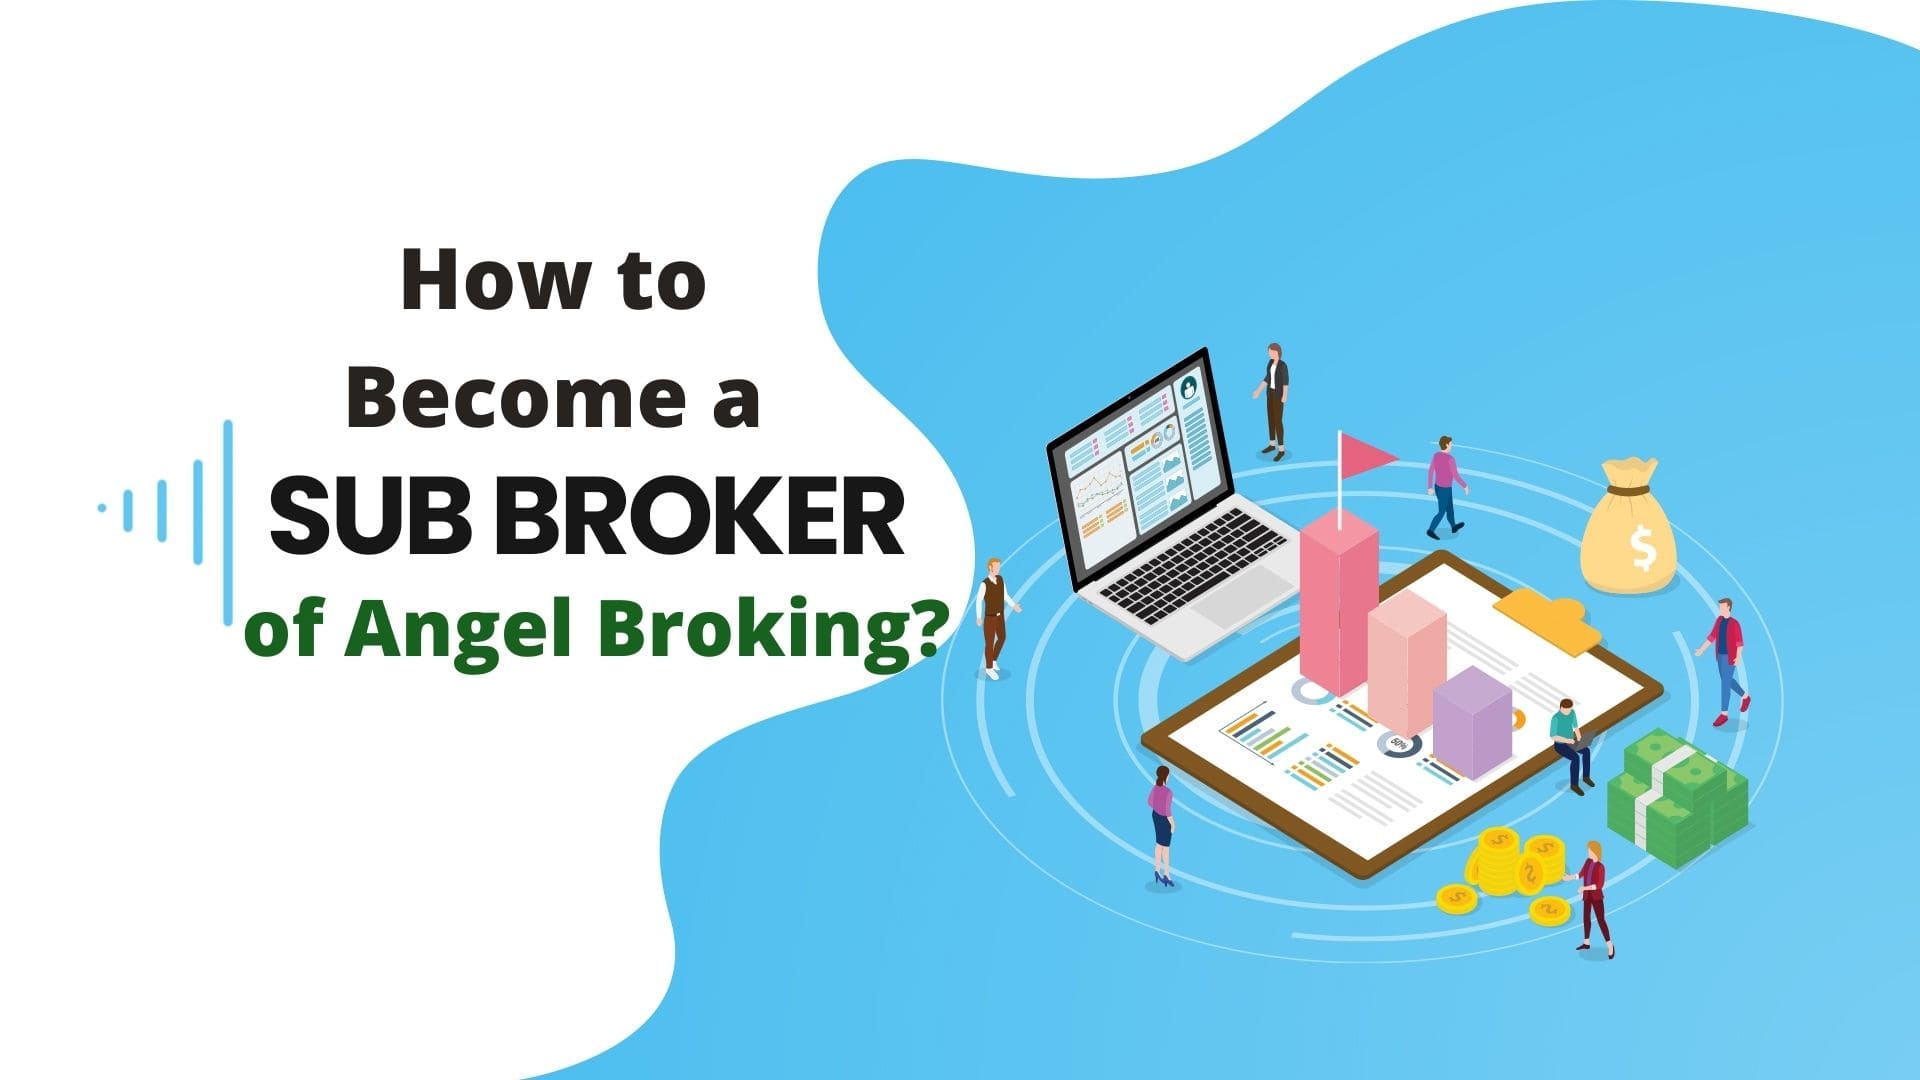 How to Become a Sub Broker of Angel Broking